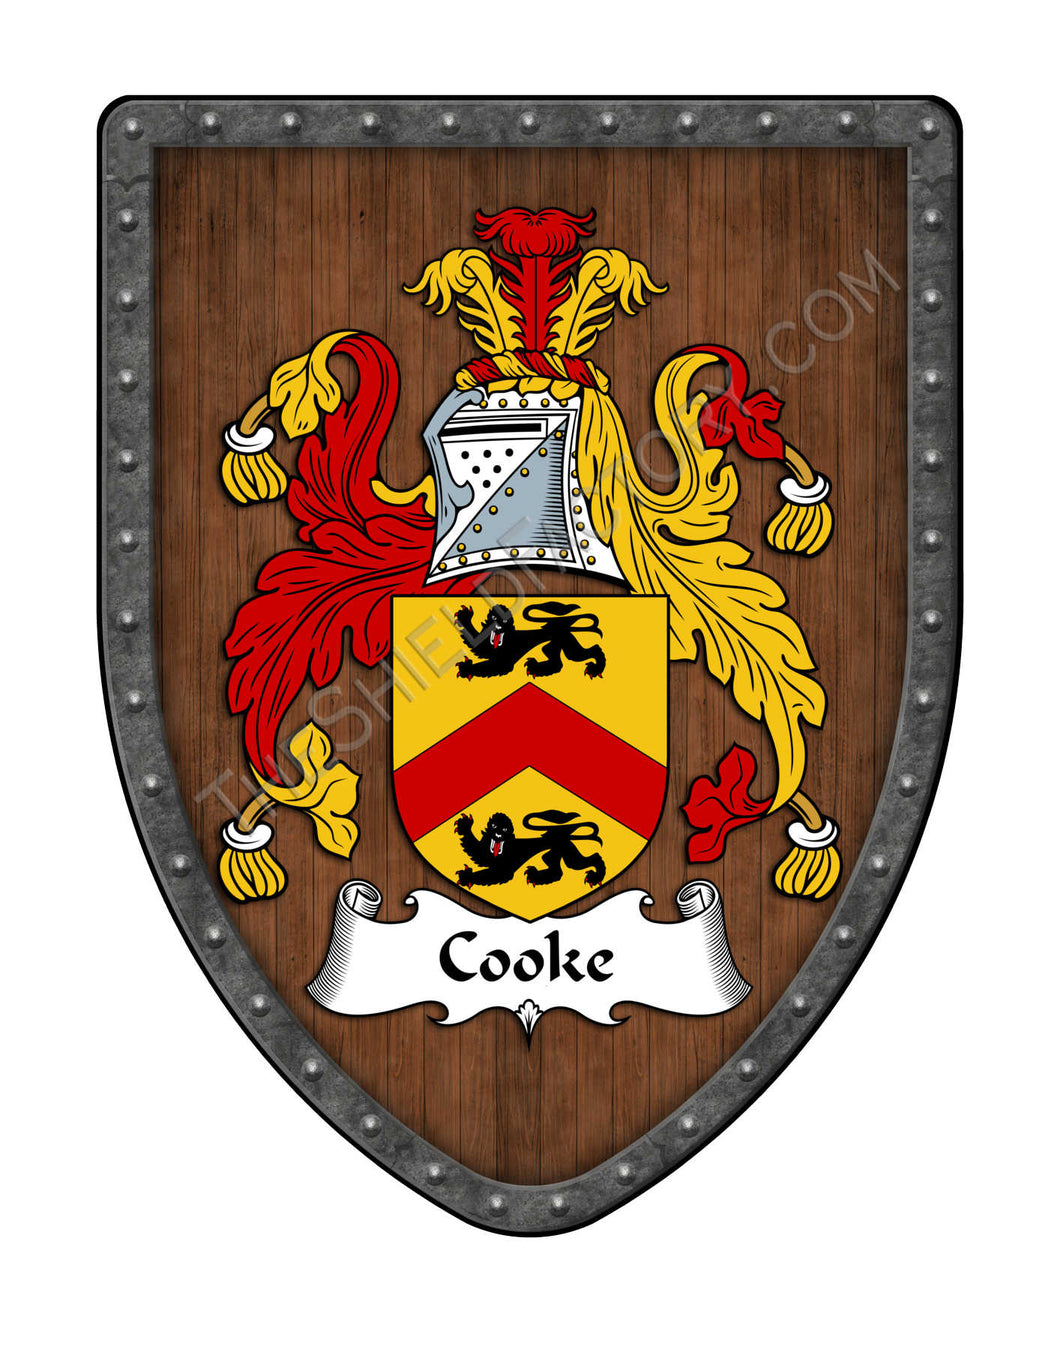 Cooke Coat of Arms Shield Family Crest